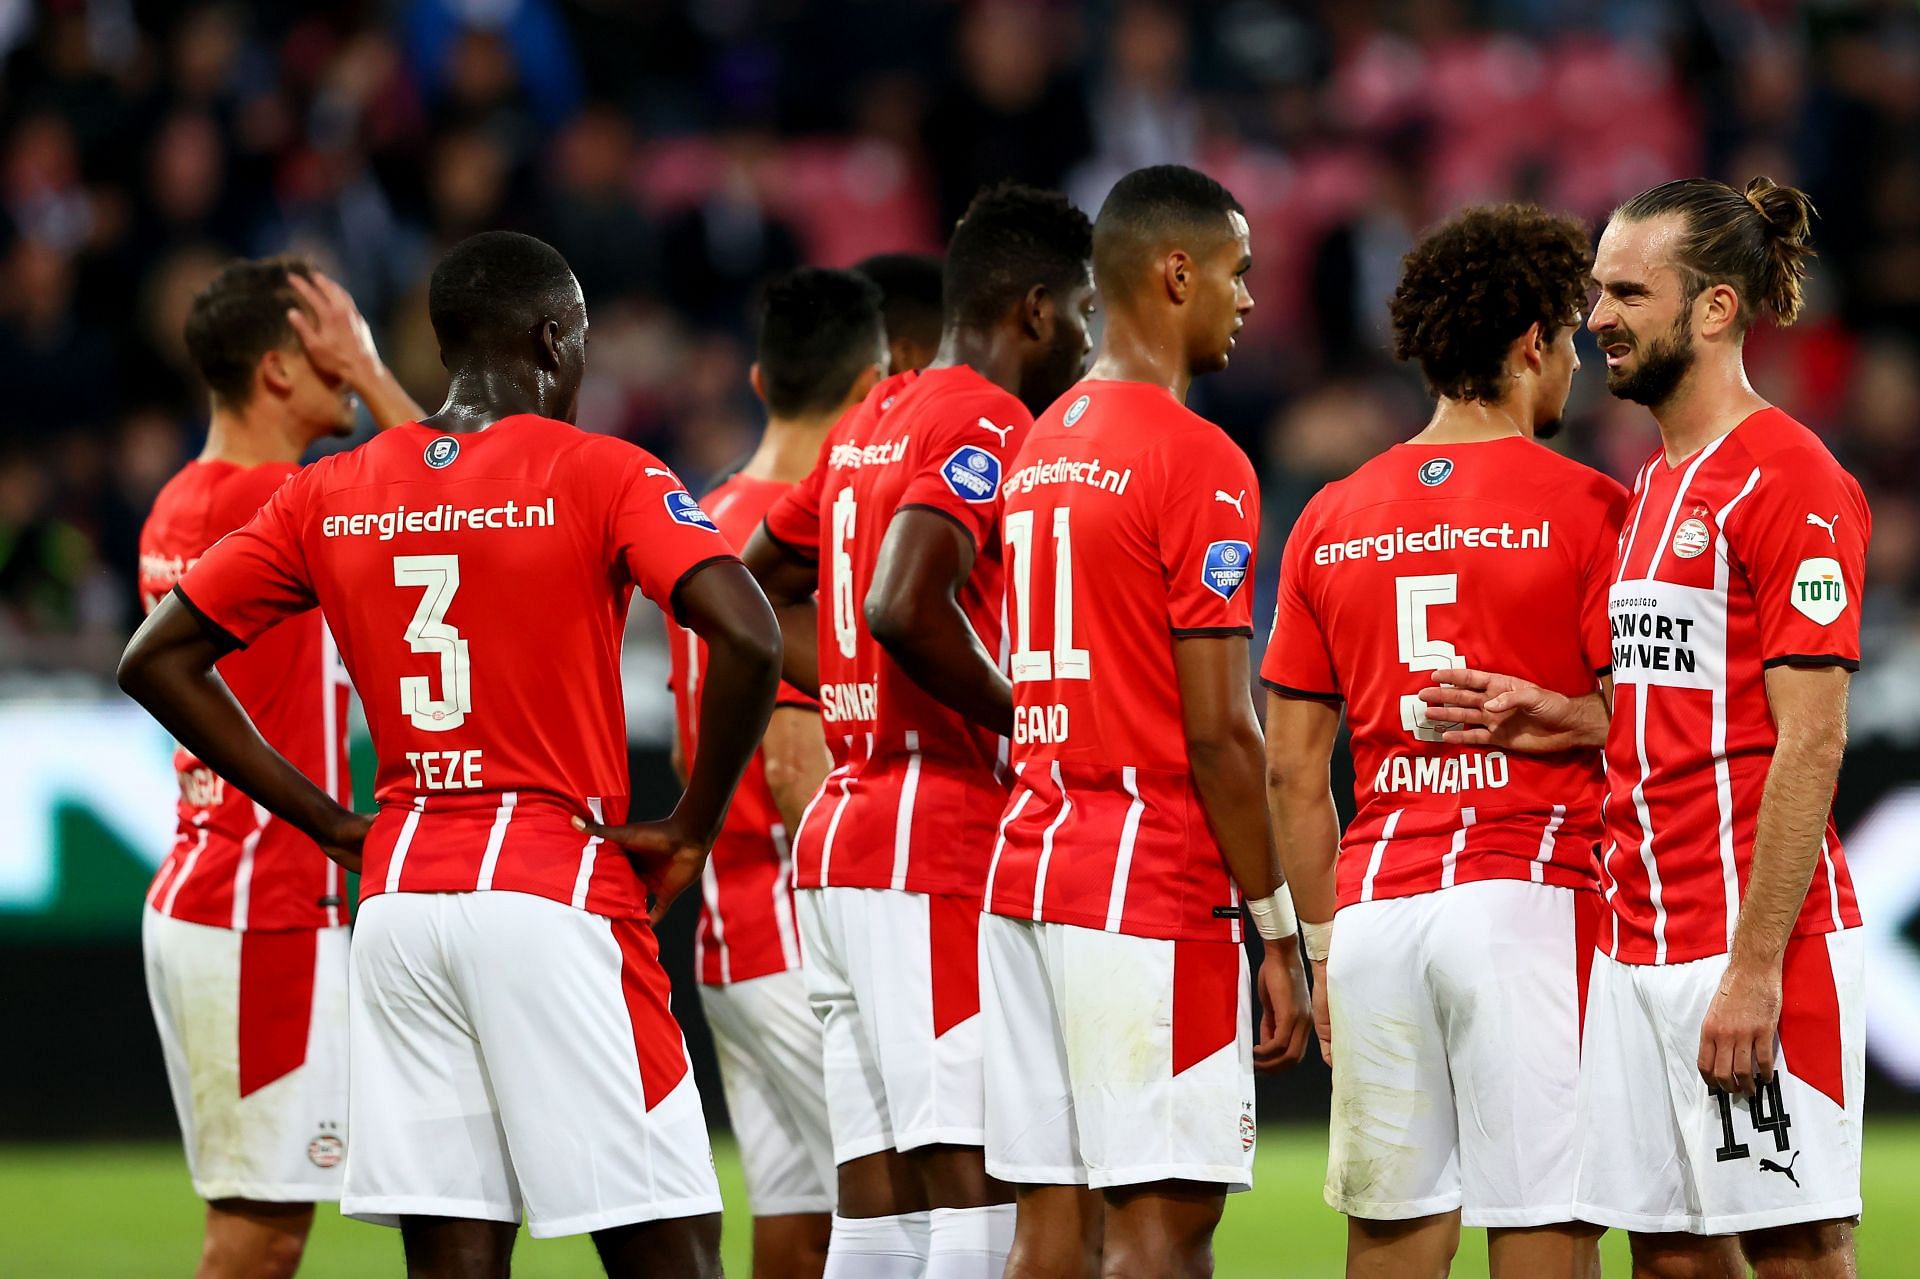 PSV will look to get back to winning ways on Saturday.